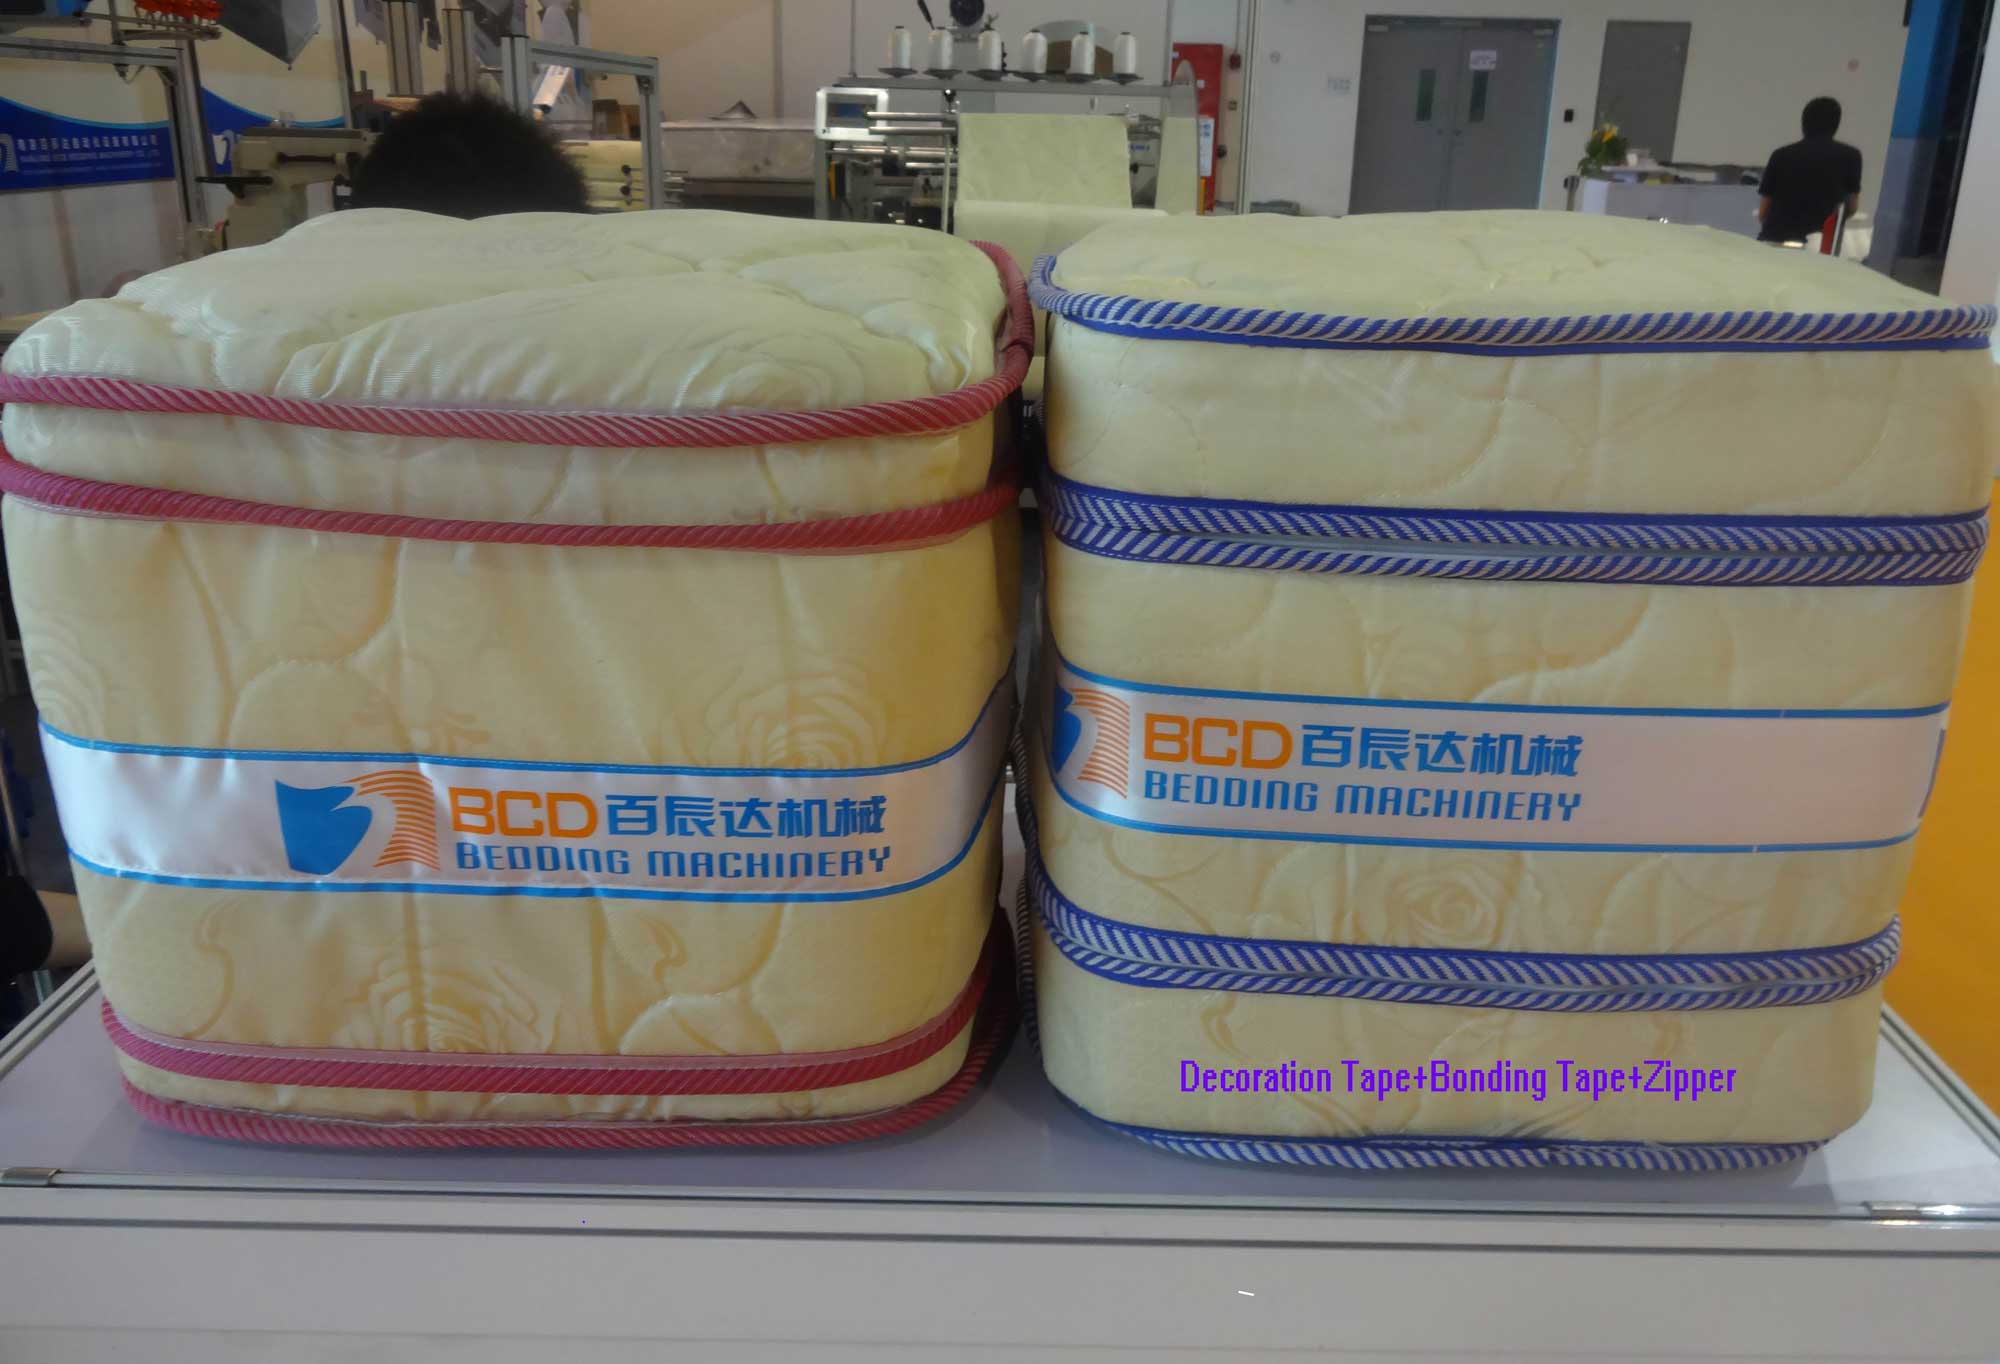 Model BFD Mattress Decoration Tape Sewing System(3 In 1)